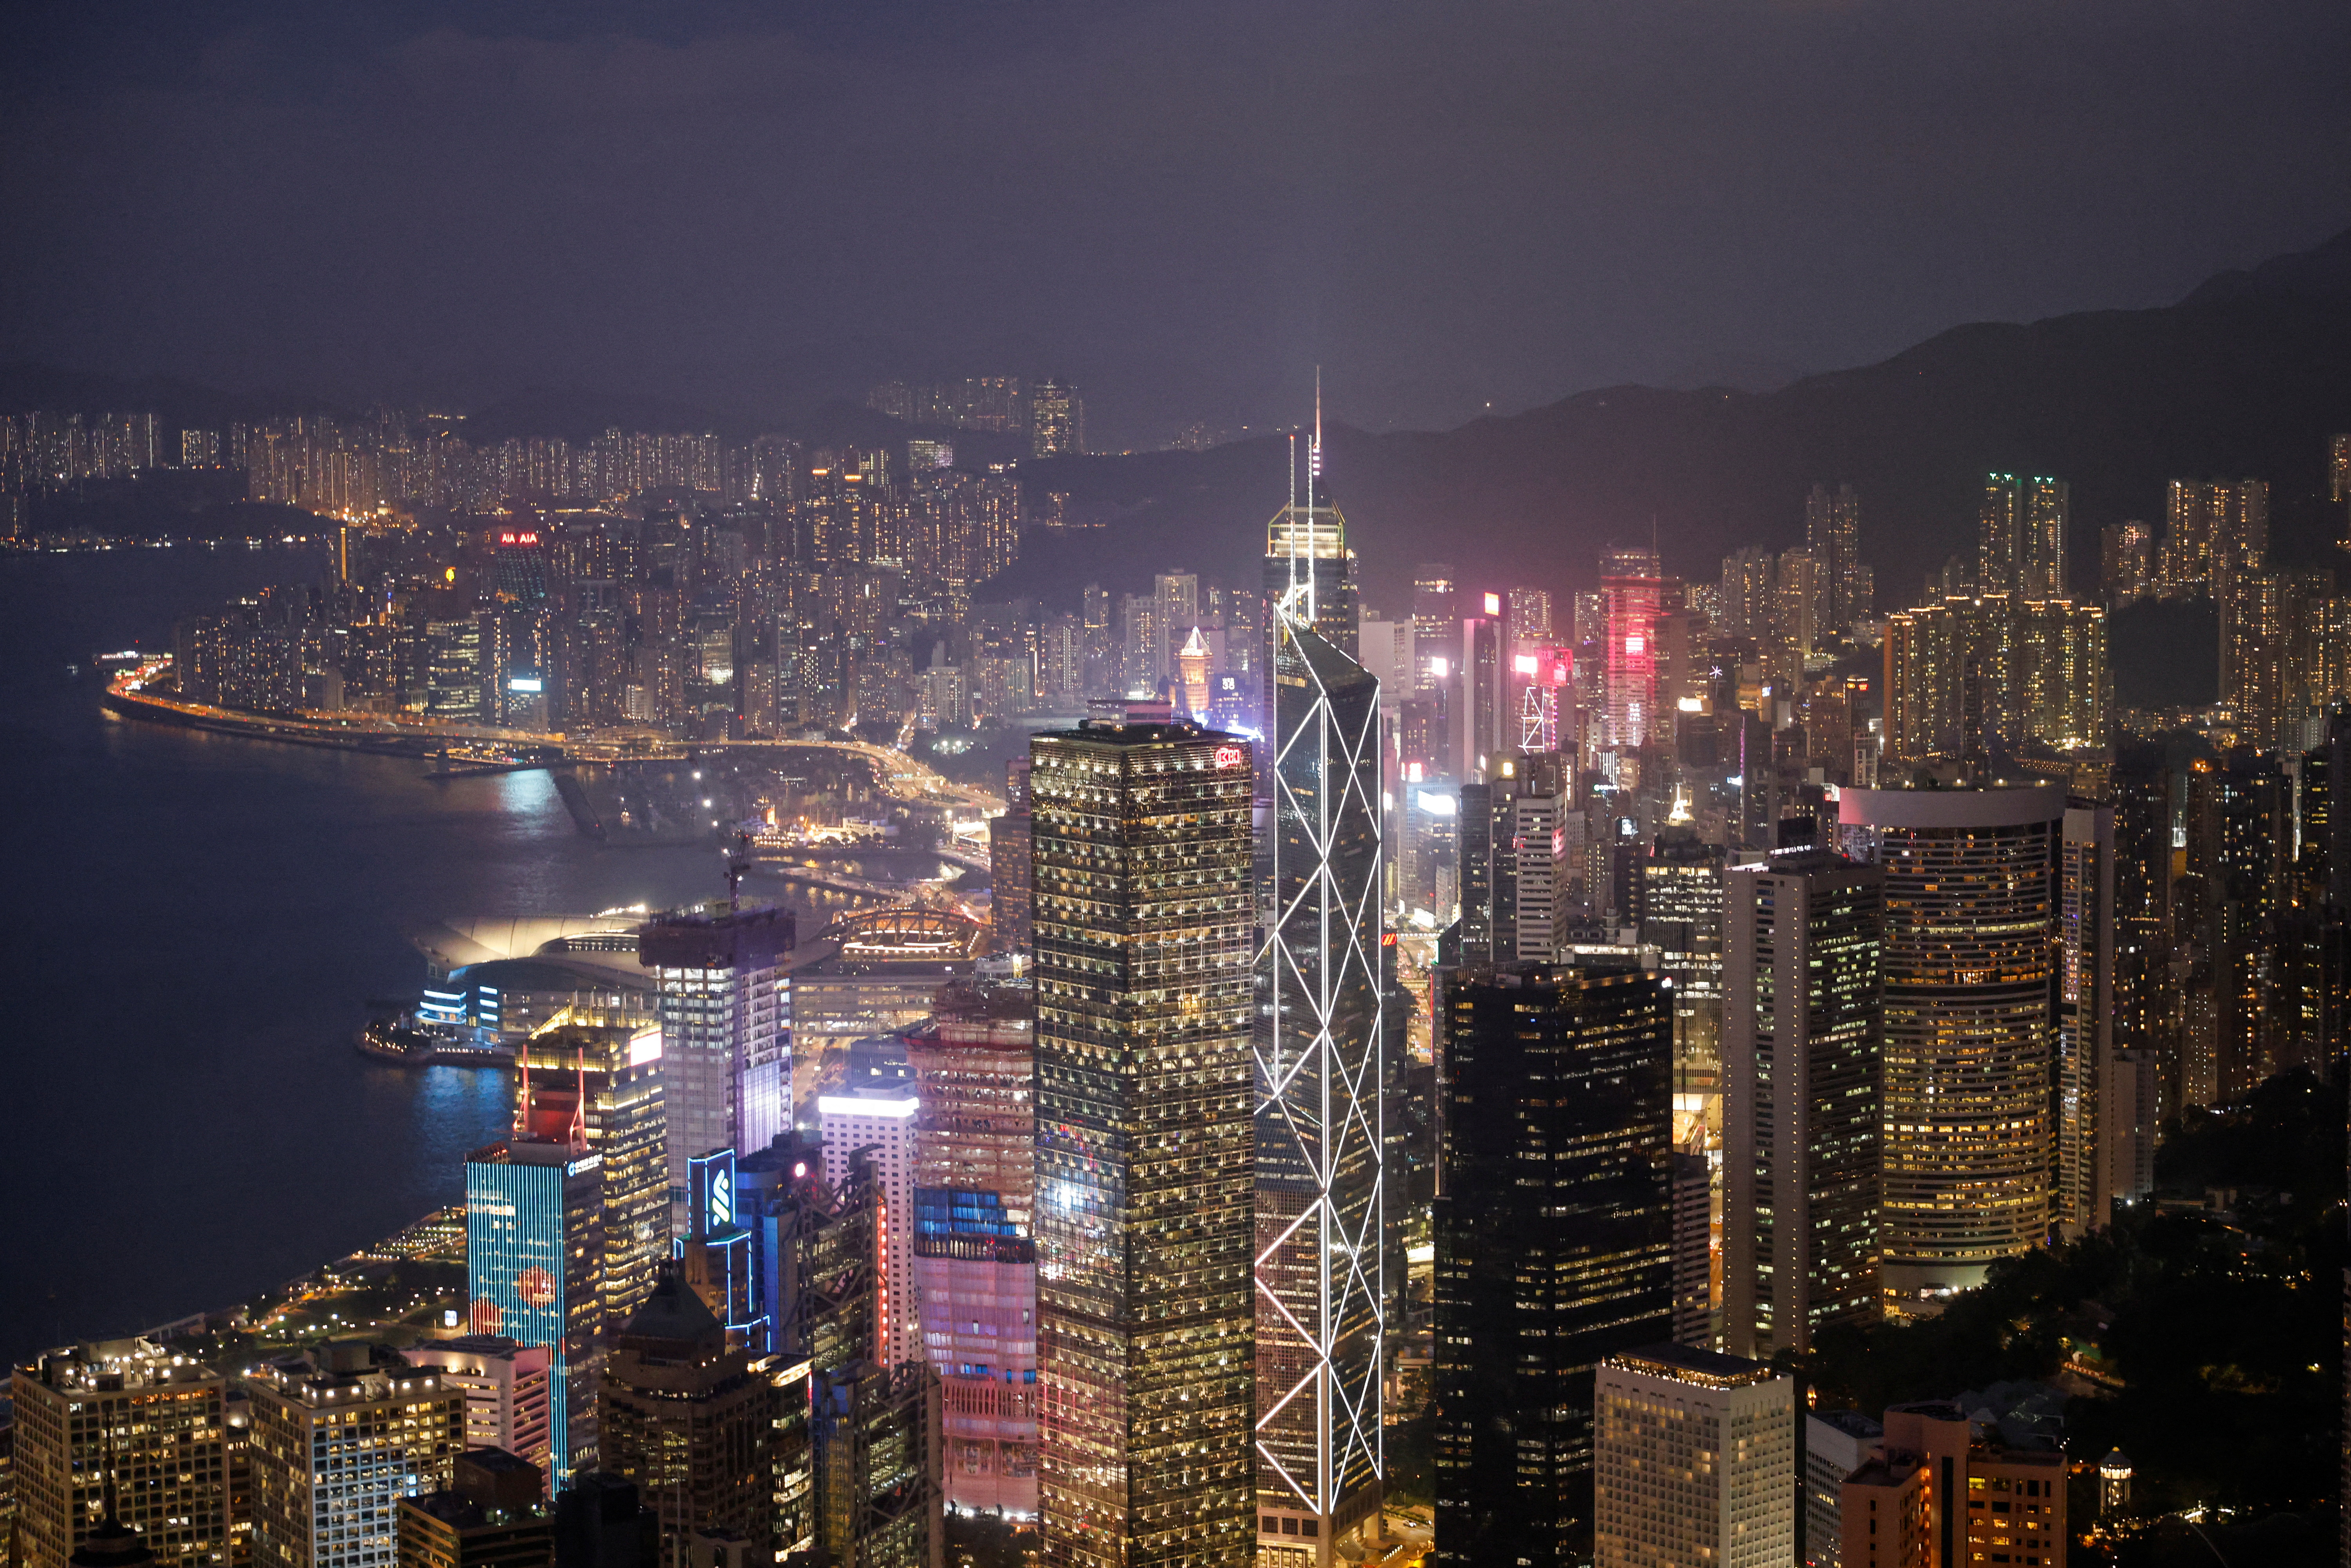 An evening view of the financial Central district and Victoria Harbour in Hong Kong